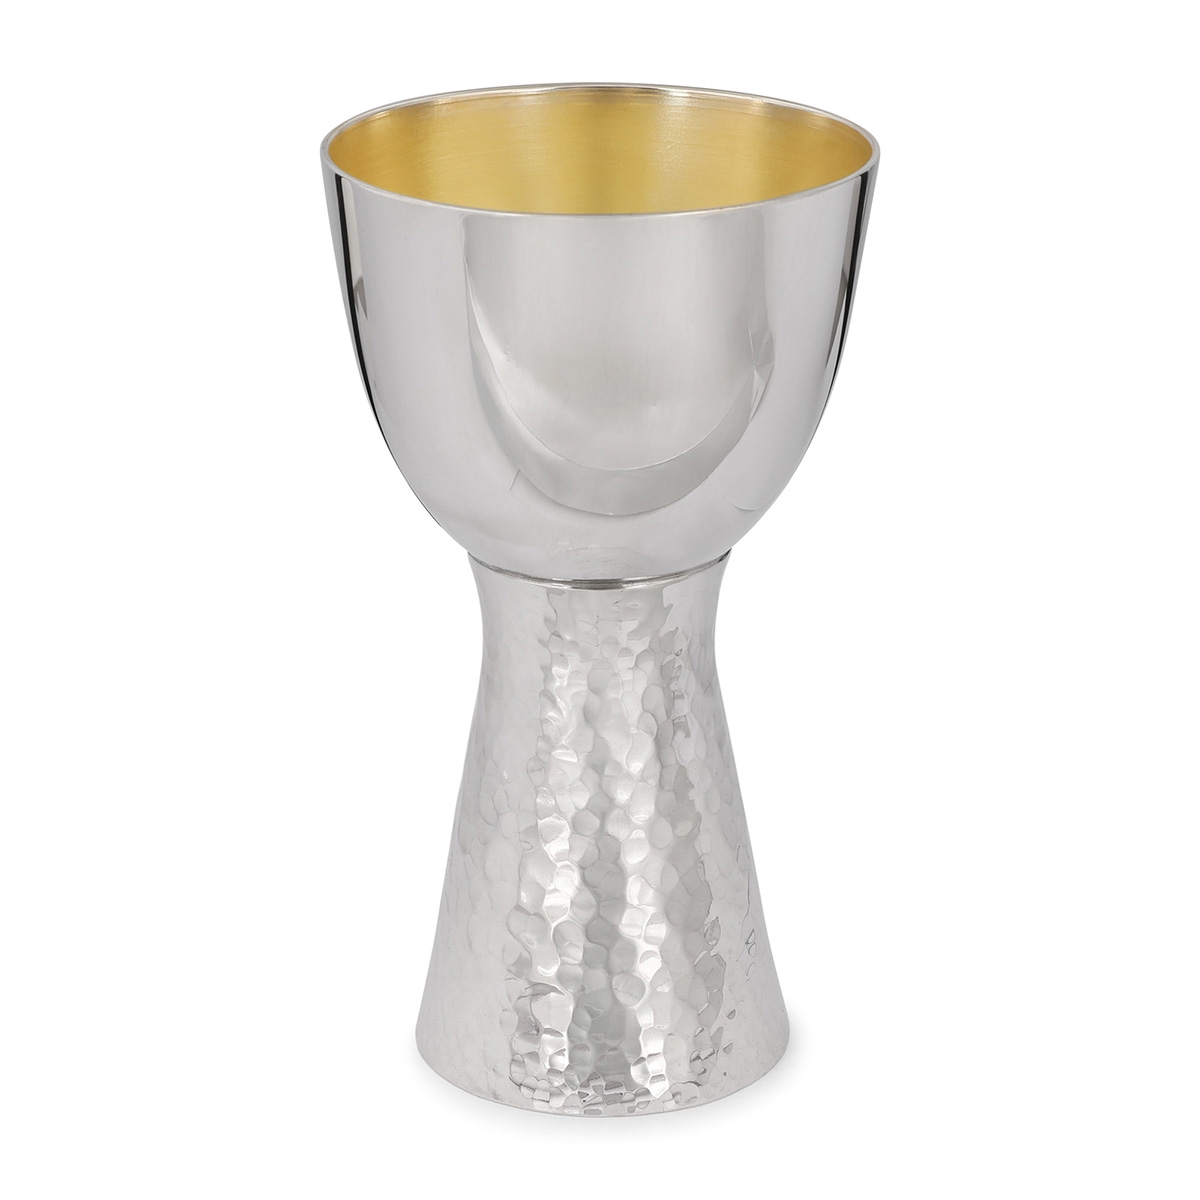 Bier Judaica Luxurious Handcrafted Sterling Silver Kiddush Cup With Two-Textured Finish - 1